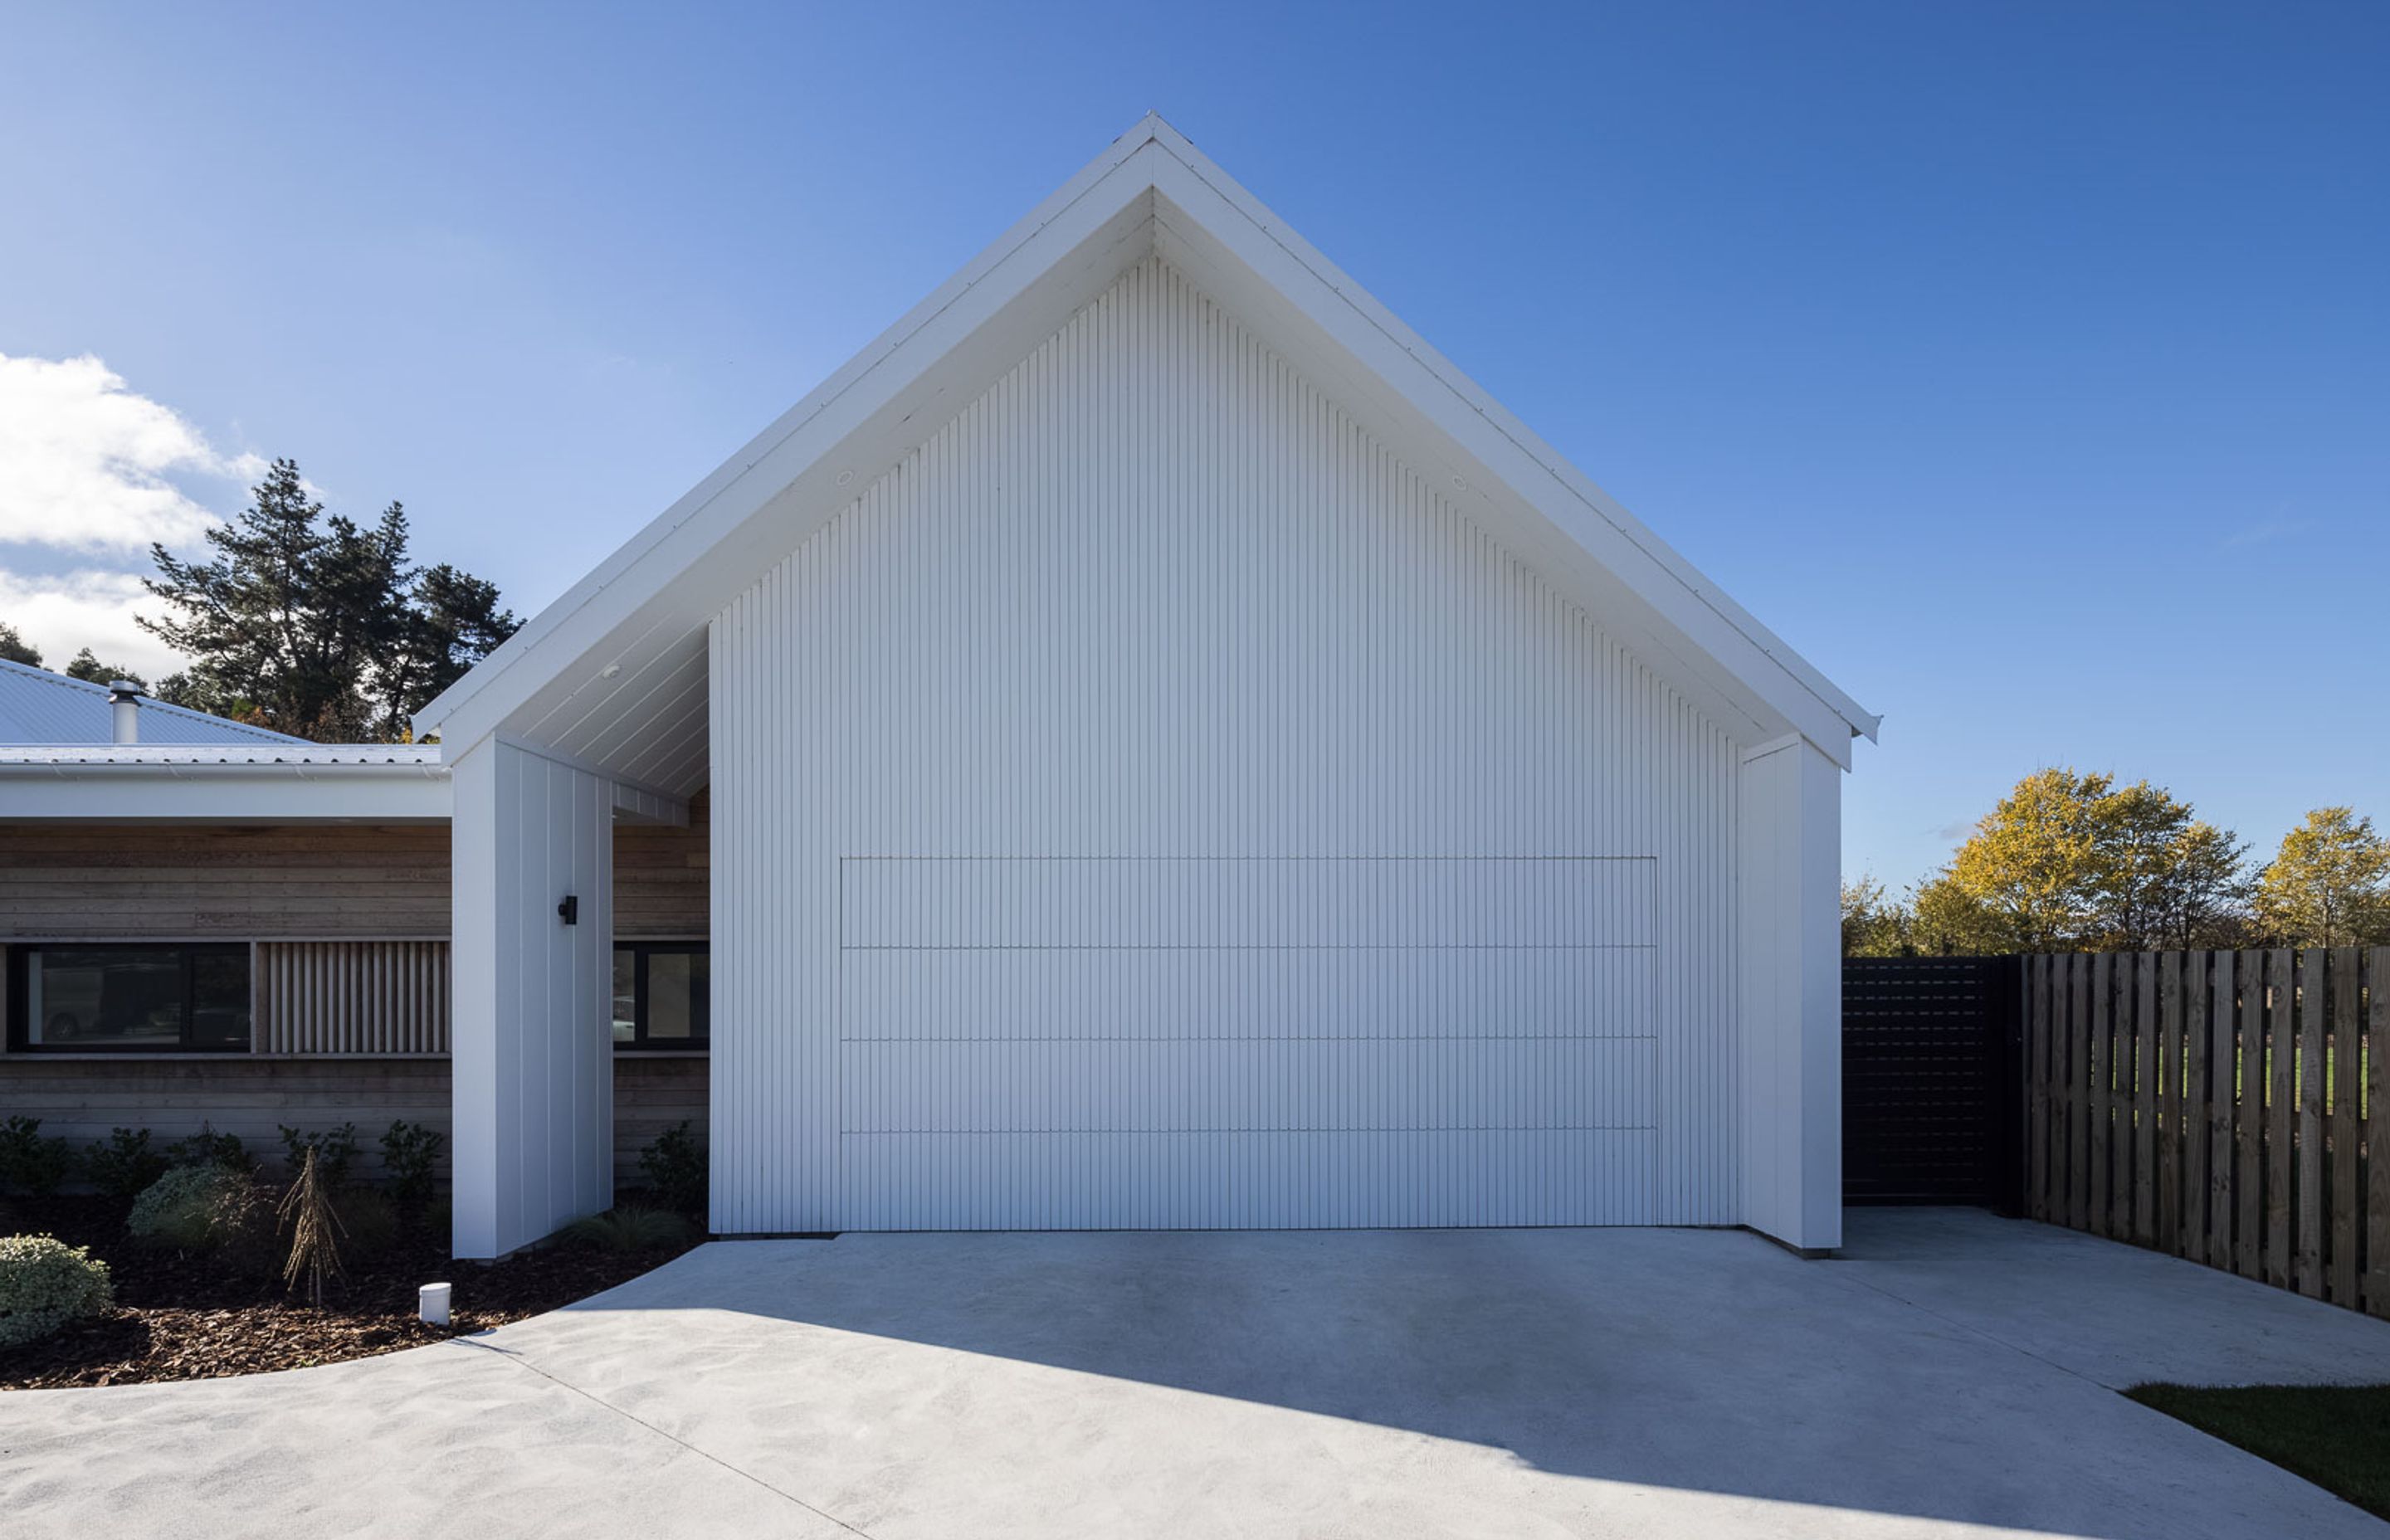 The flush-mounted garage door helps maintain the seamless look of the gable end on the eastern pavilion, which also houses the main bedroom.